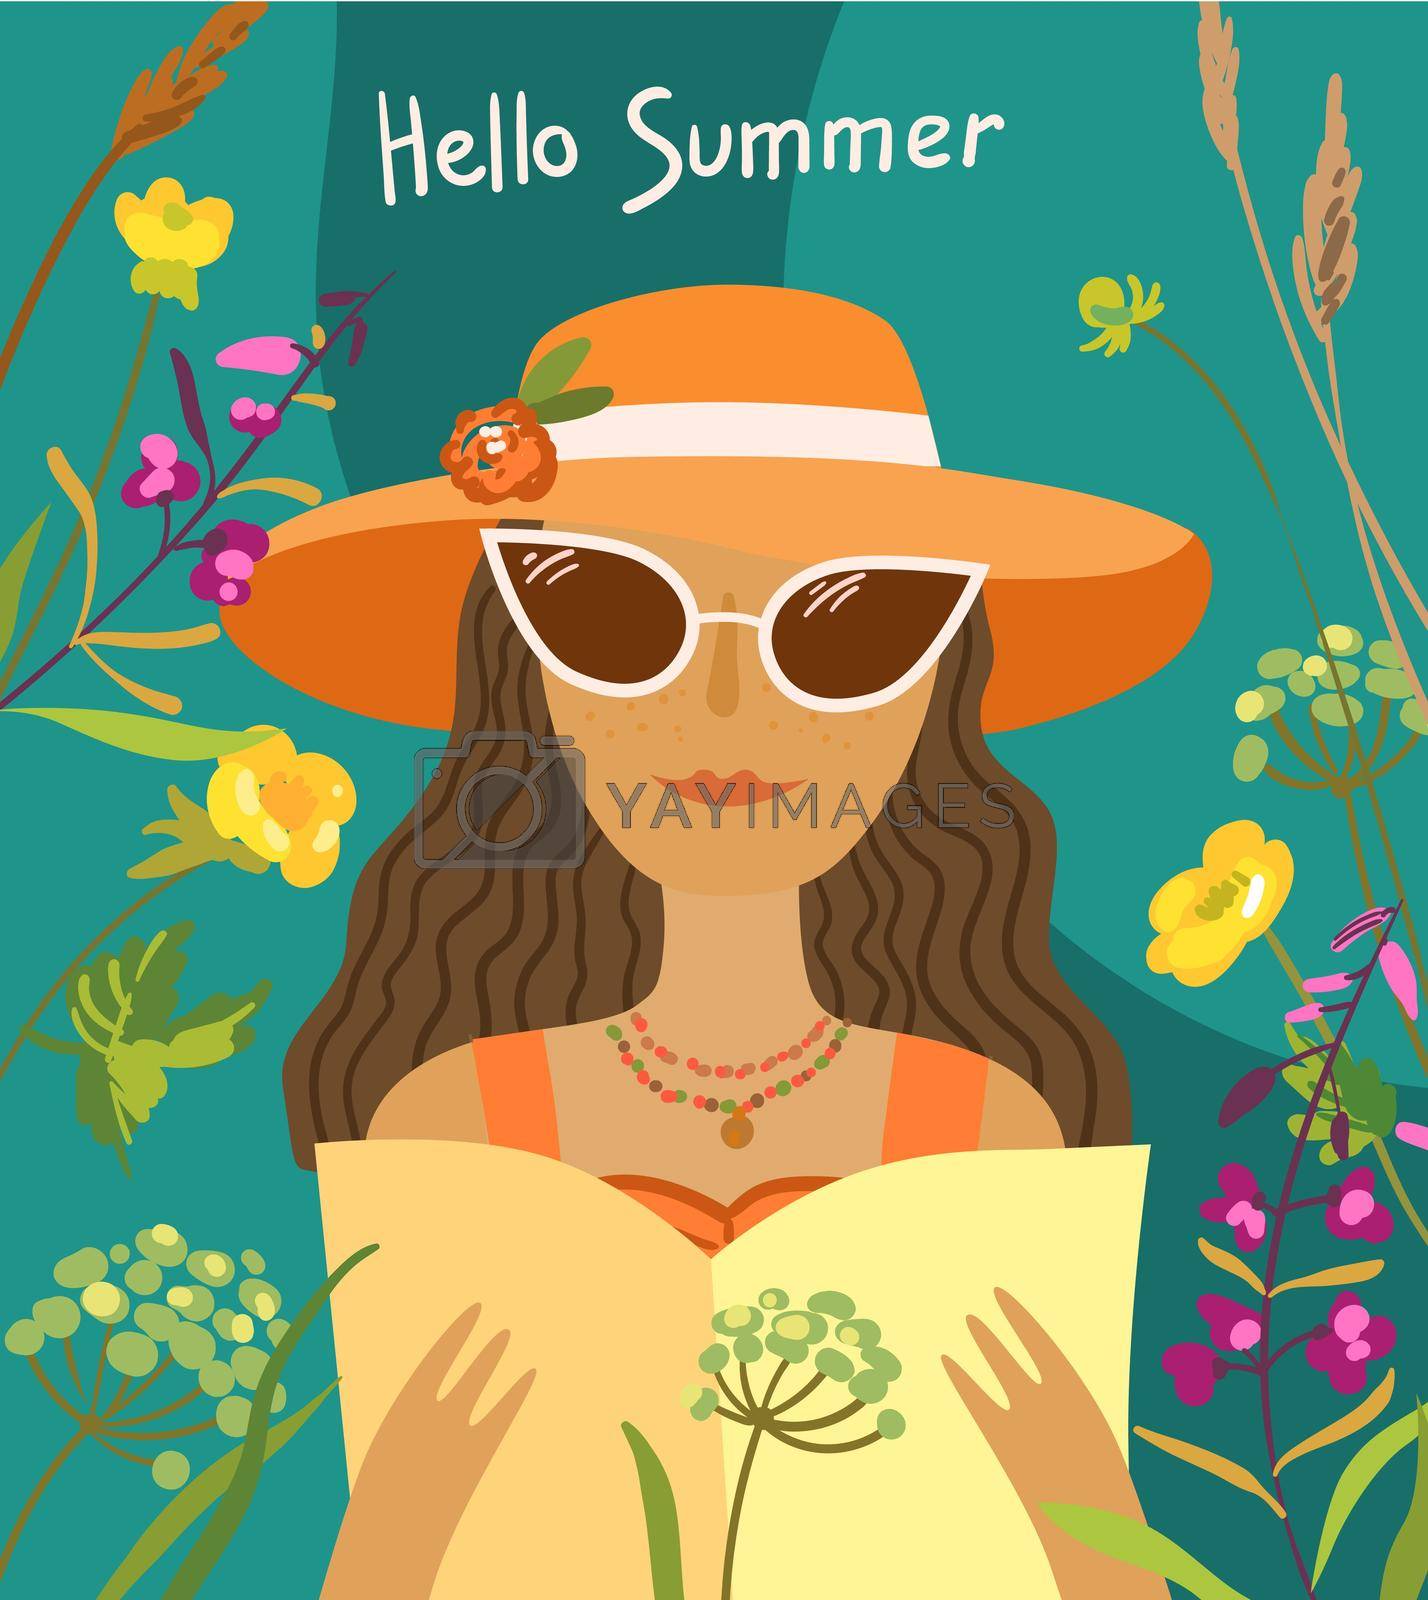 Royalty free image of Woman in hat and sunglasses. Beautiful illustration about summer. by steshnikova